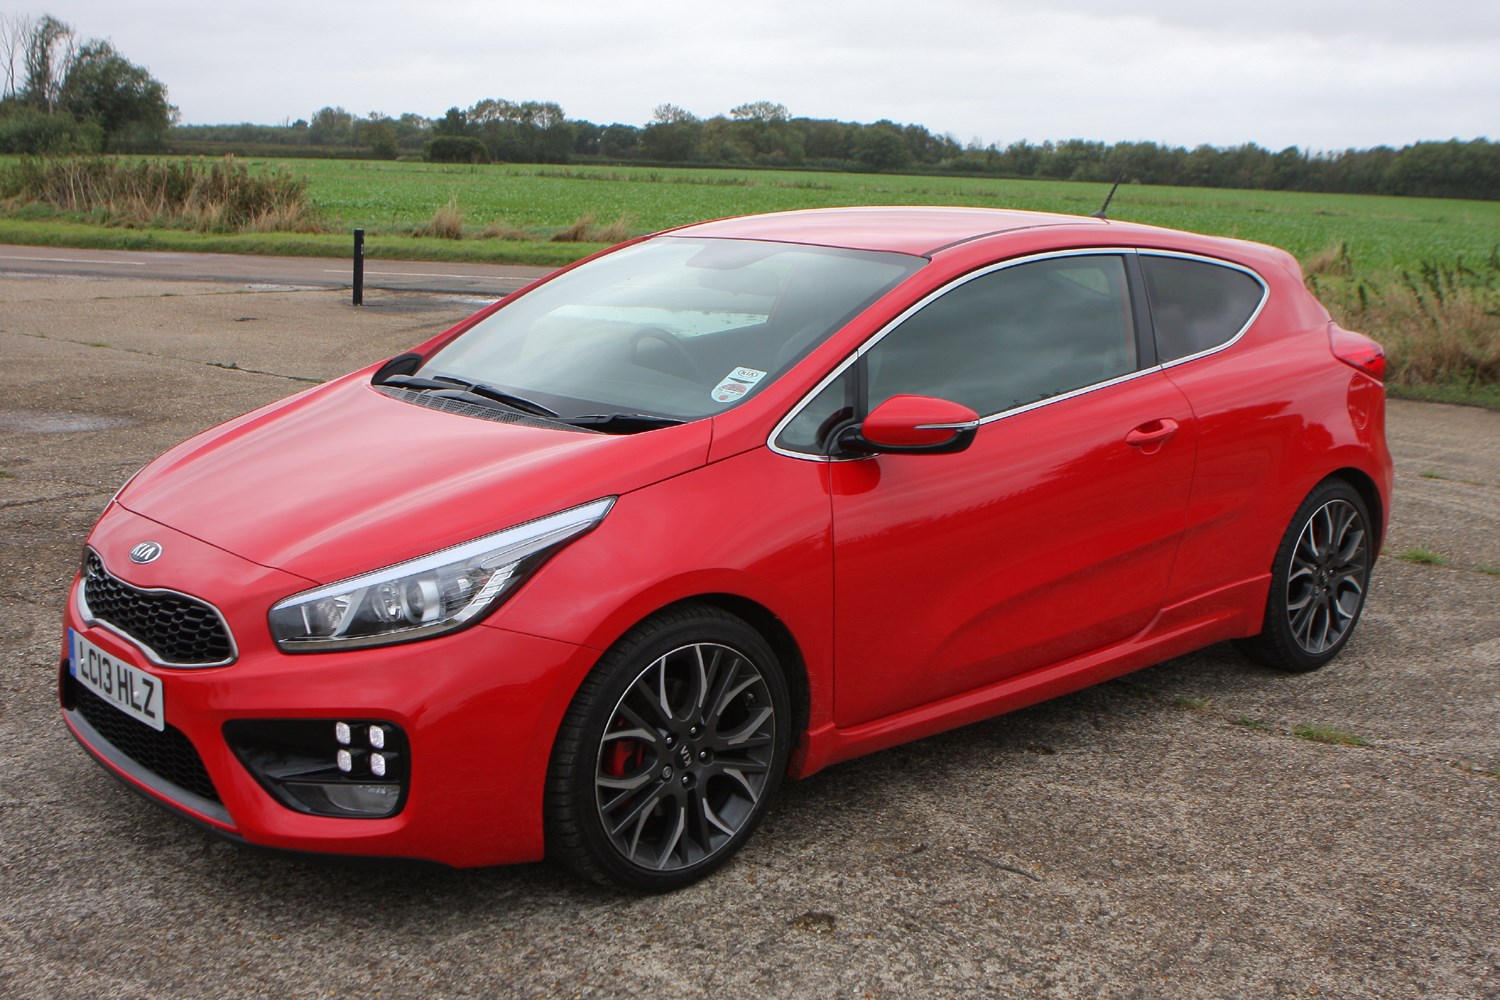 Used Kia ProCeed GT (2013 - 2019) Review | Parkers